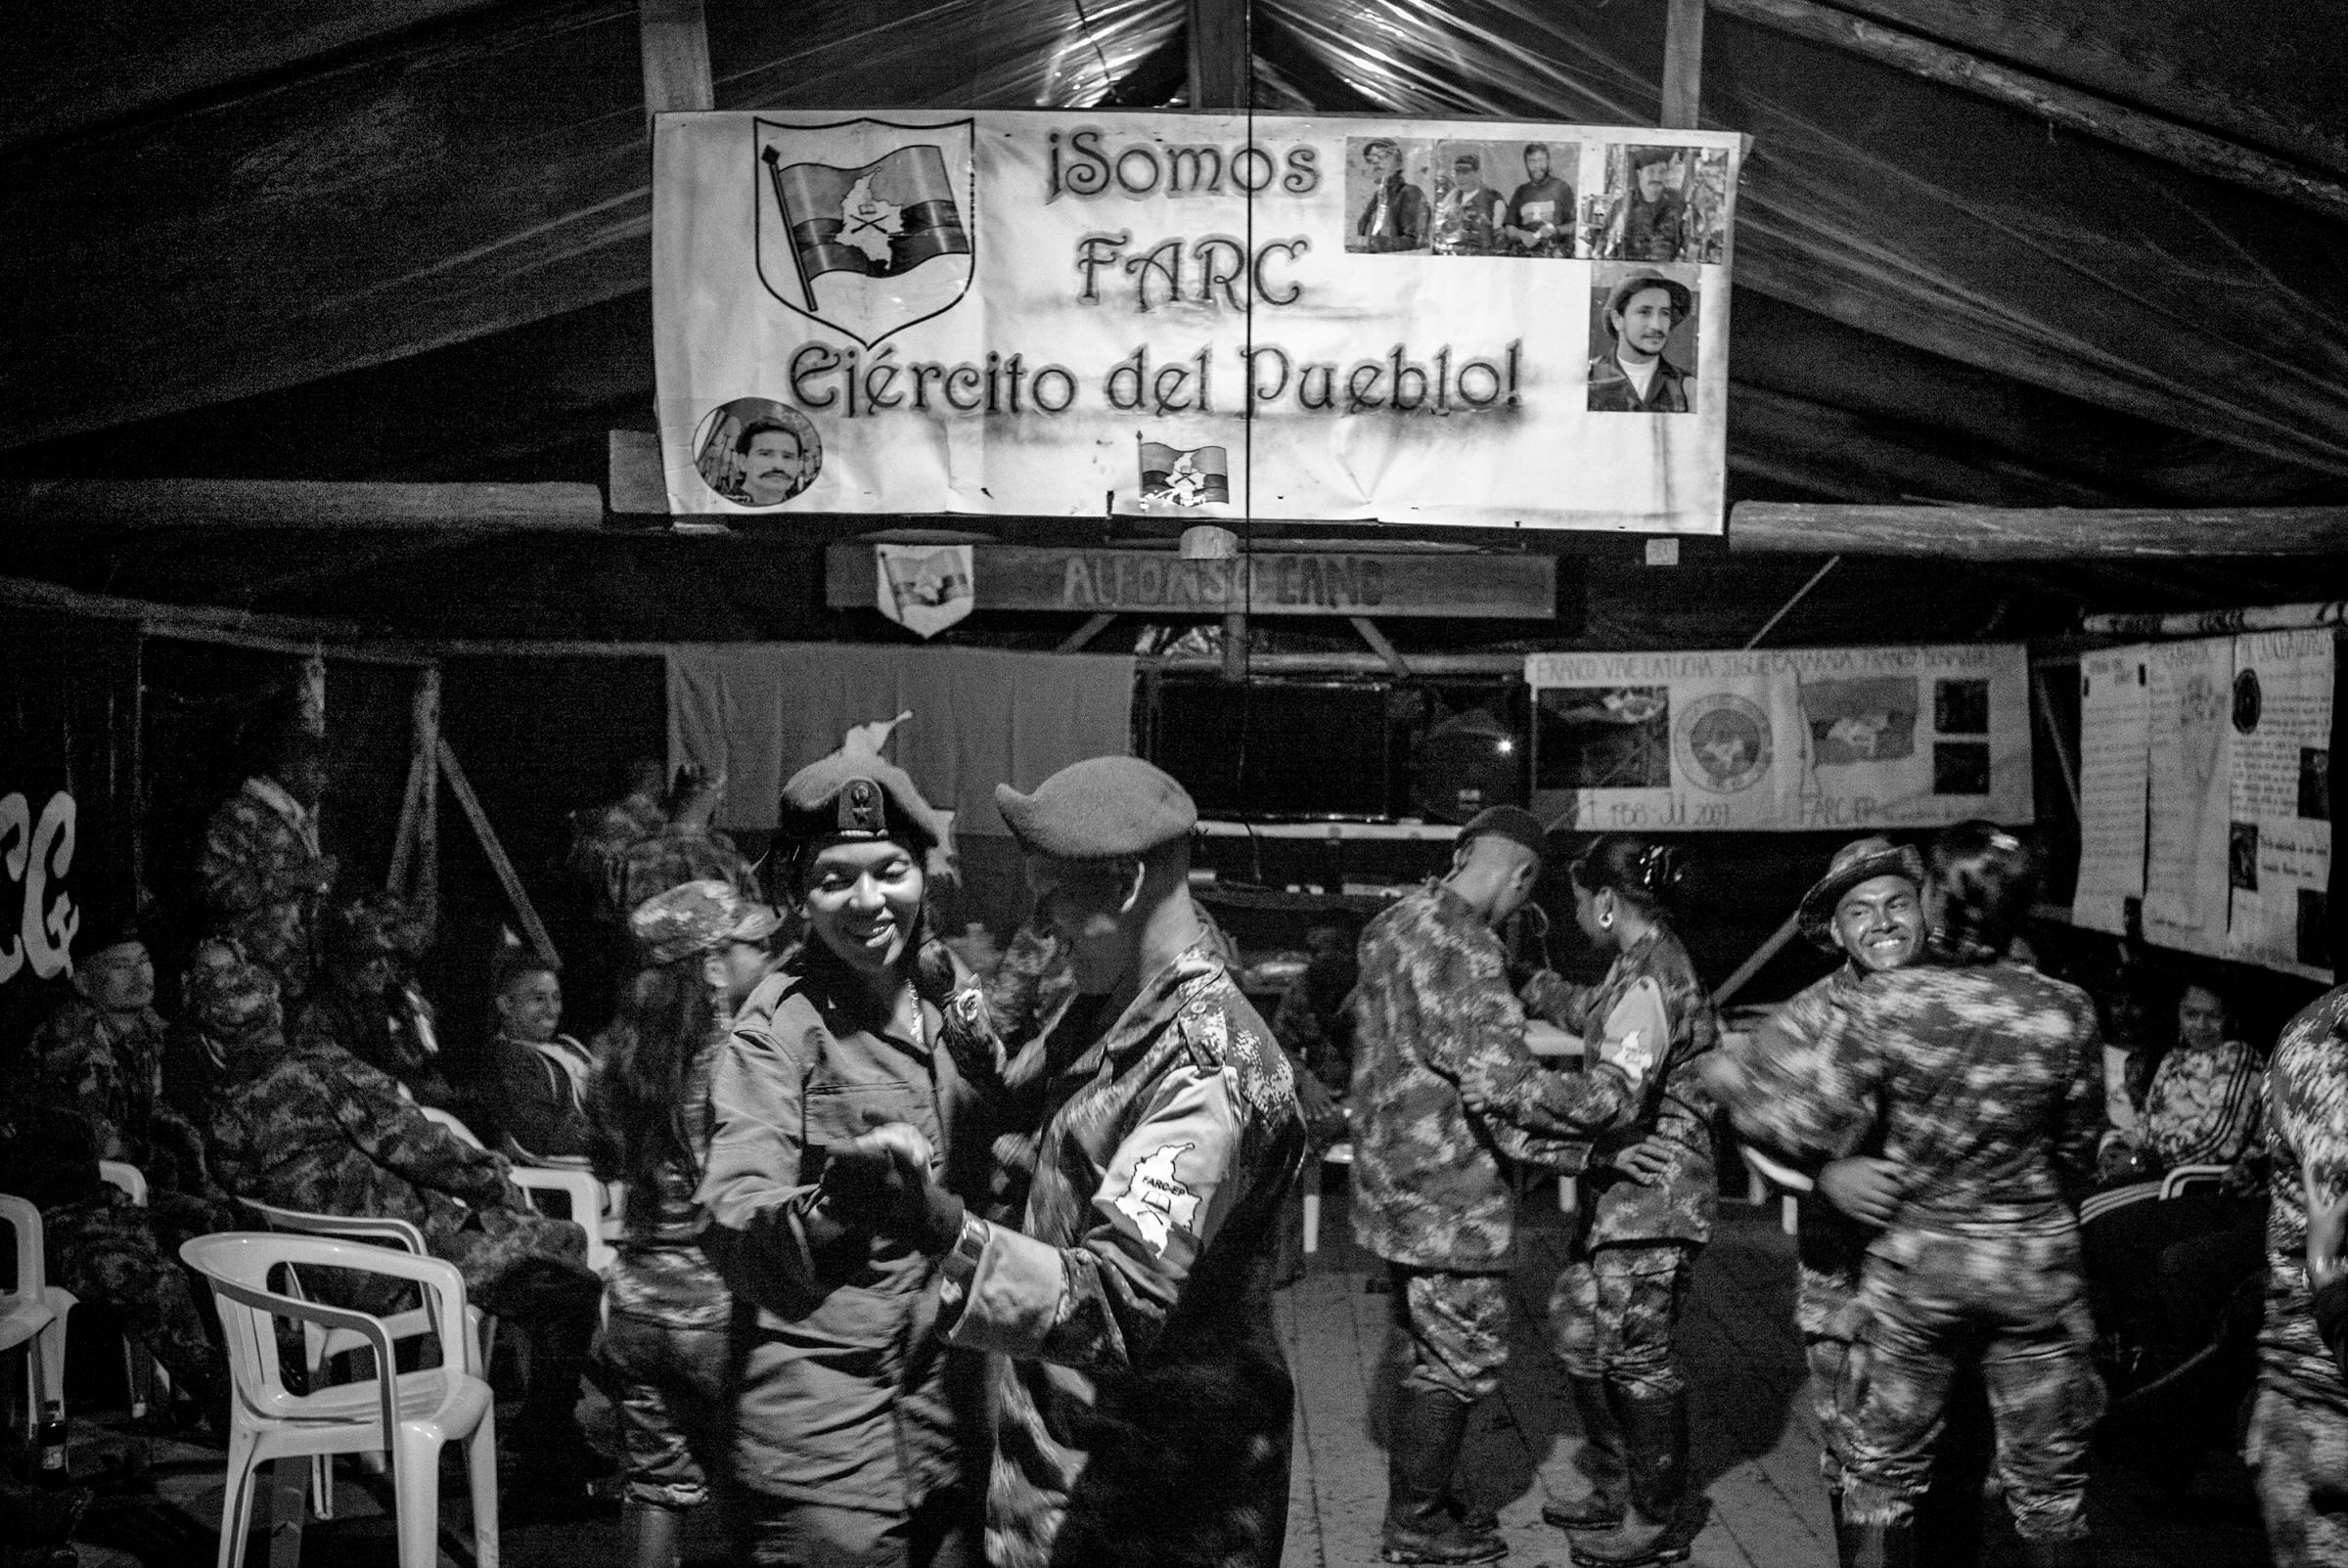 Revolutionary Armed Forces of Colombia (FARC) guerrilla members dance during a party at a camp. For fity-two years, FARC has been an armed movement in Colombia. With the peace agreements reached in Havana on August 24, 2016, it will begin to move towards becoming a political movement, Cauca, Colombia, July 2016.